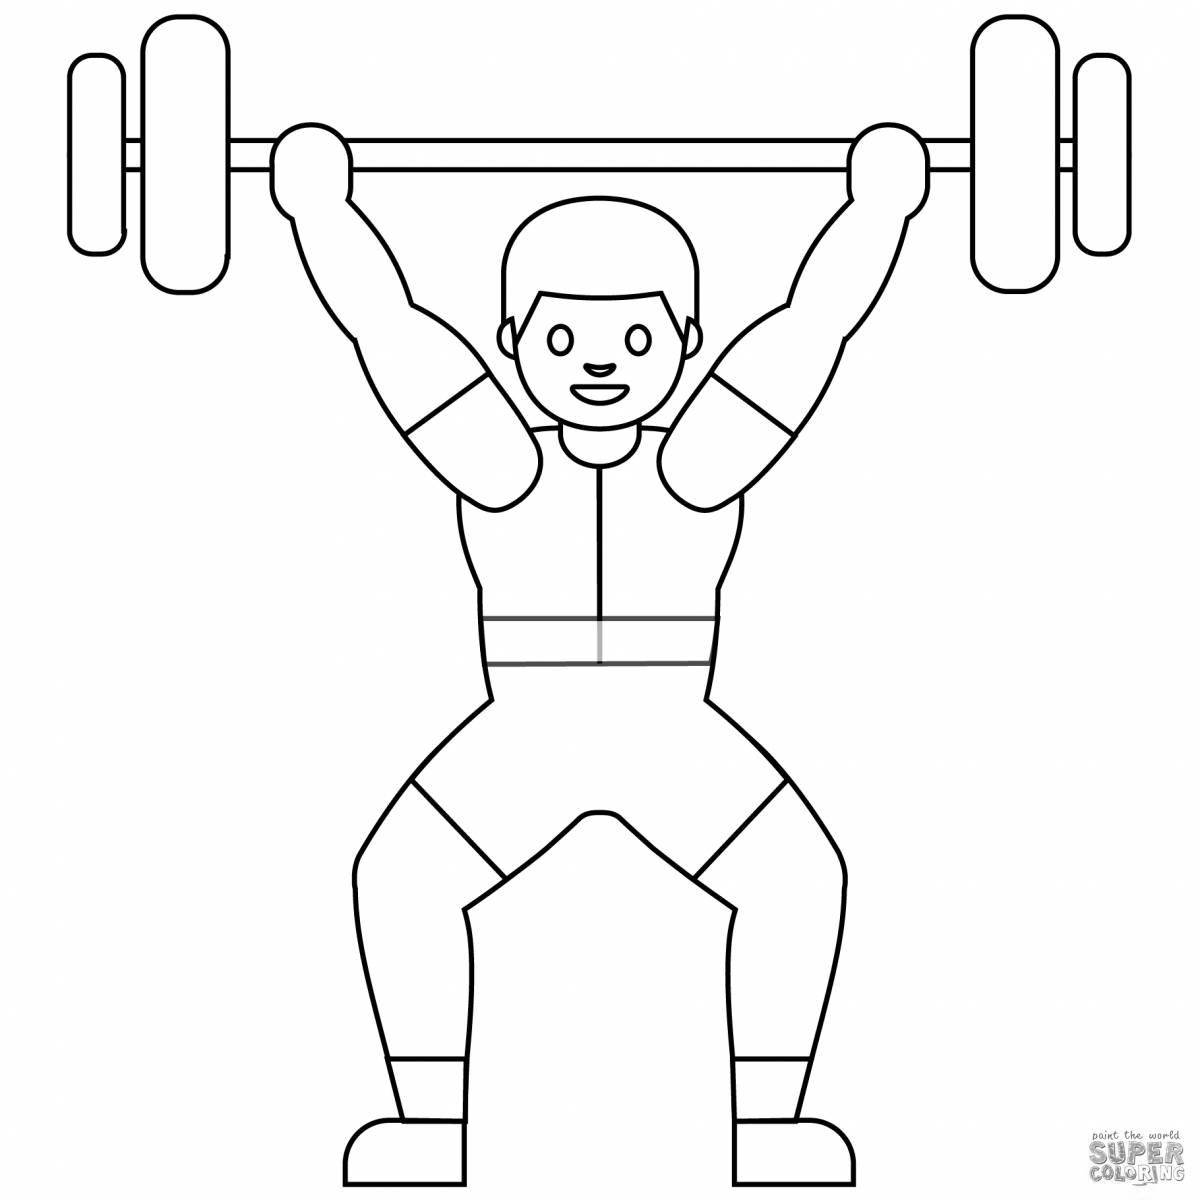 Coloring book monumental weightlifter